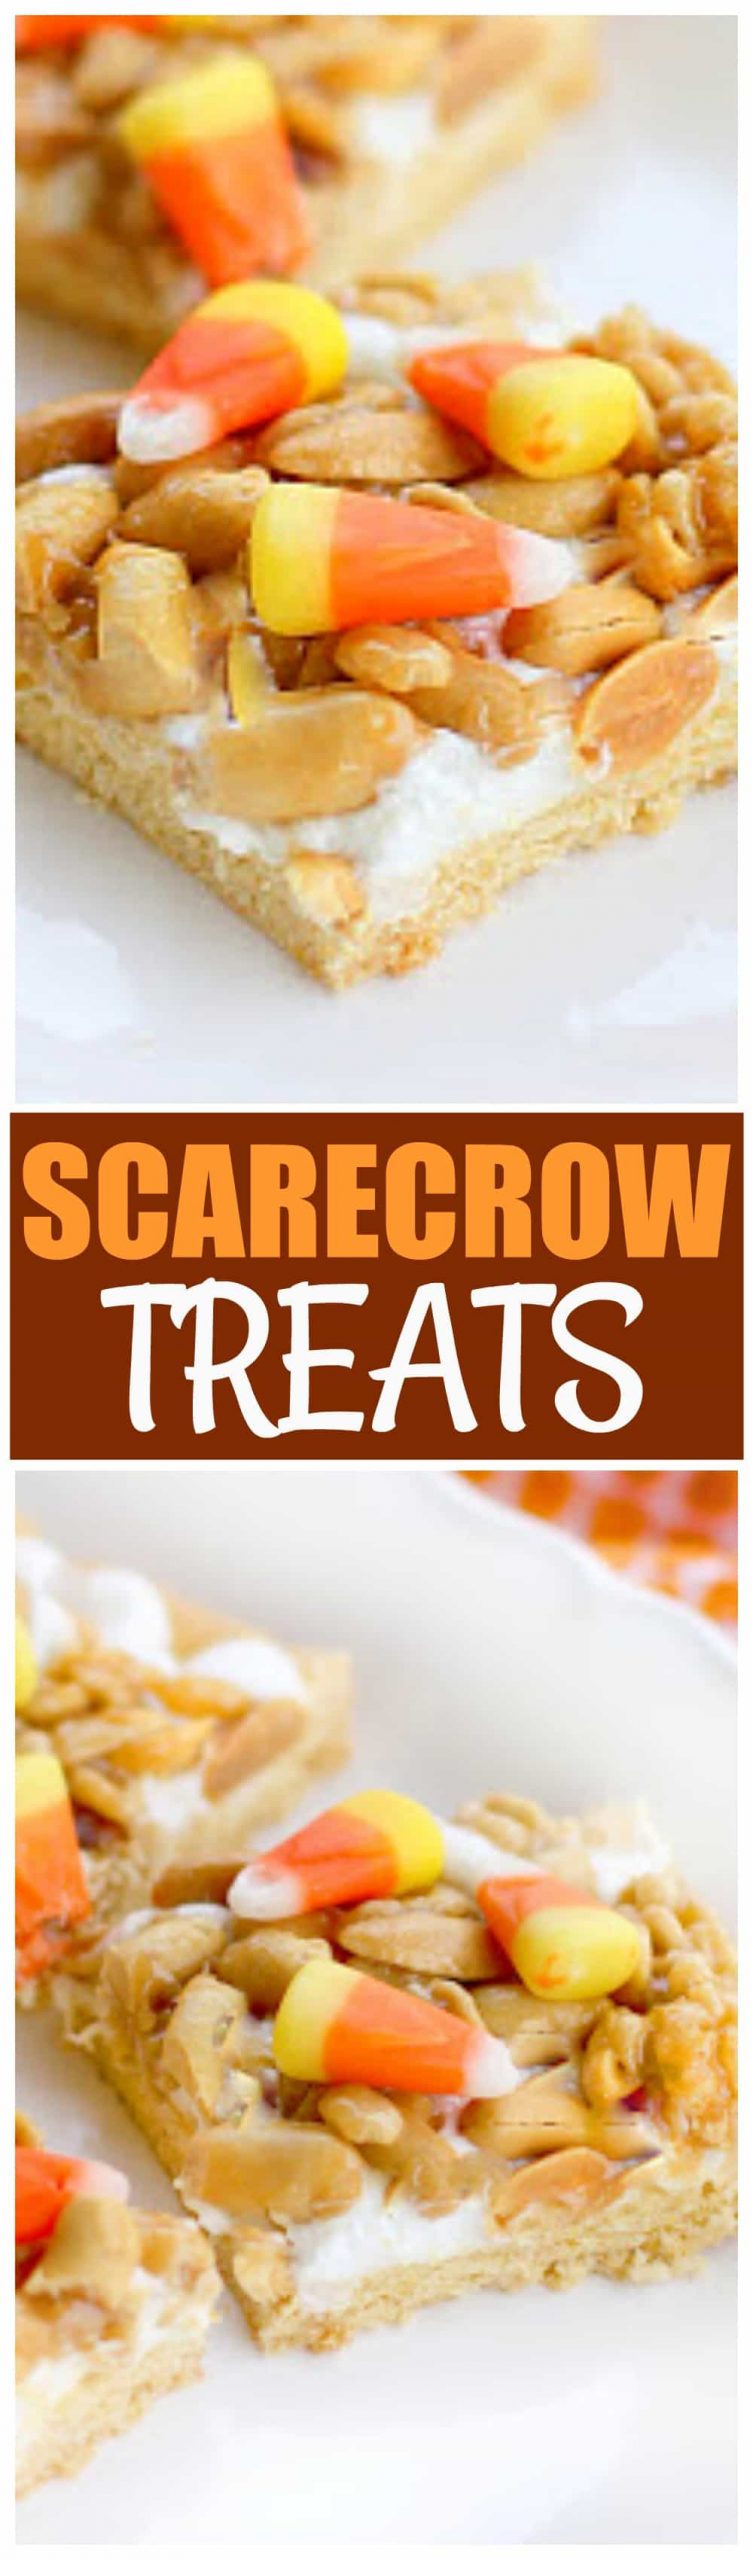 These Scarecrow Treats are a recipe you can make every Halloween. Packed with candy corn and nuts for a sweet and salty treat. #scarecrowtreats #halloween #dessert